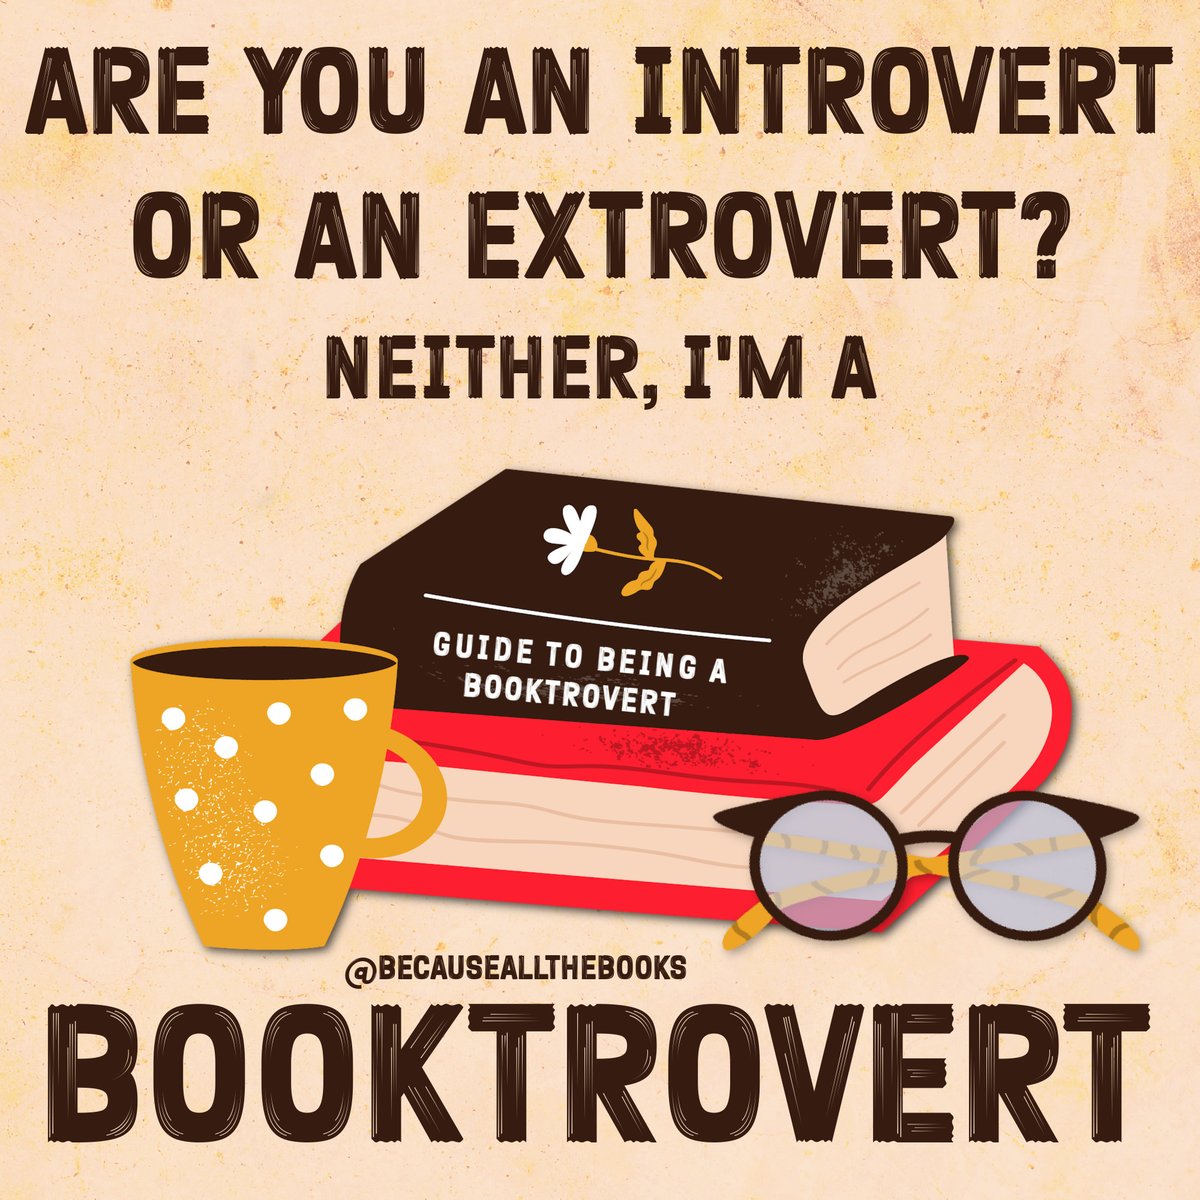 Know any booktroverts? 

#BecauseAllTheBooks #Booktrovert #BookLover #BooksAreMyLife